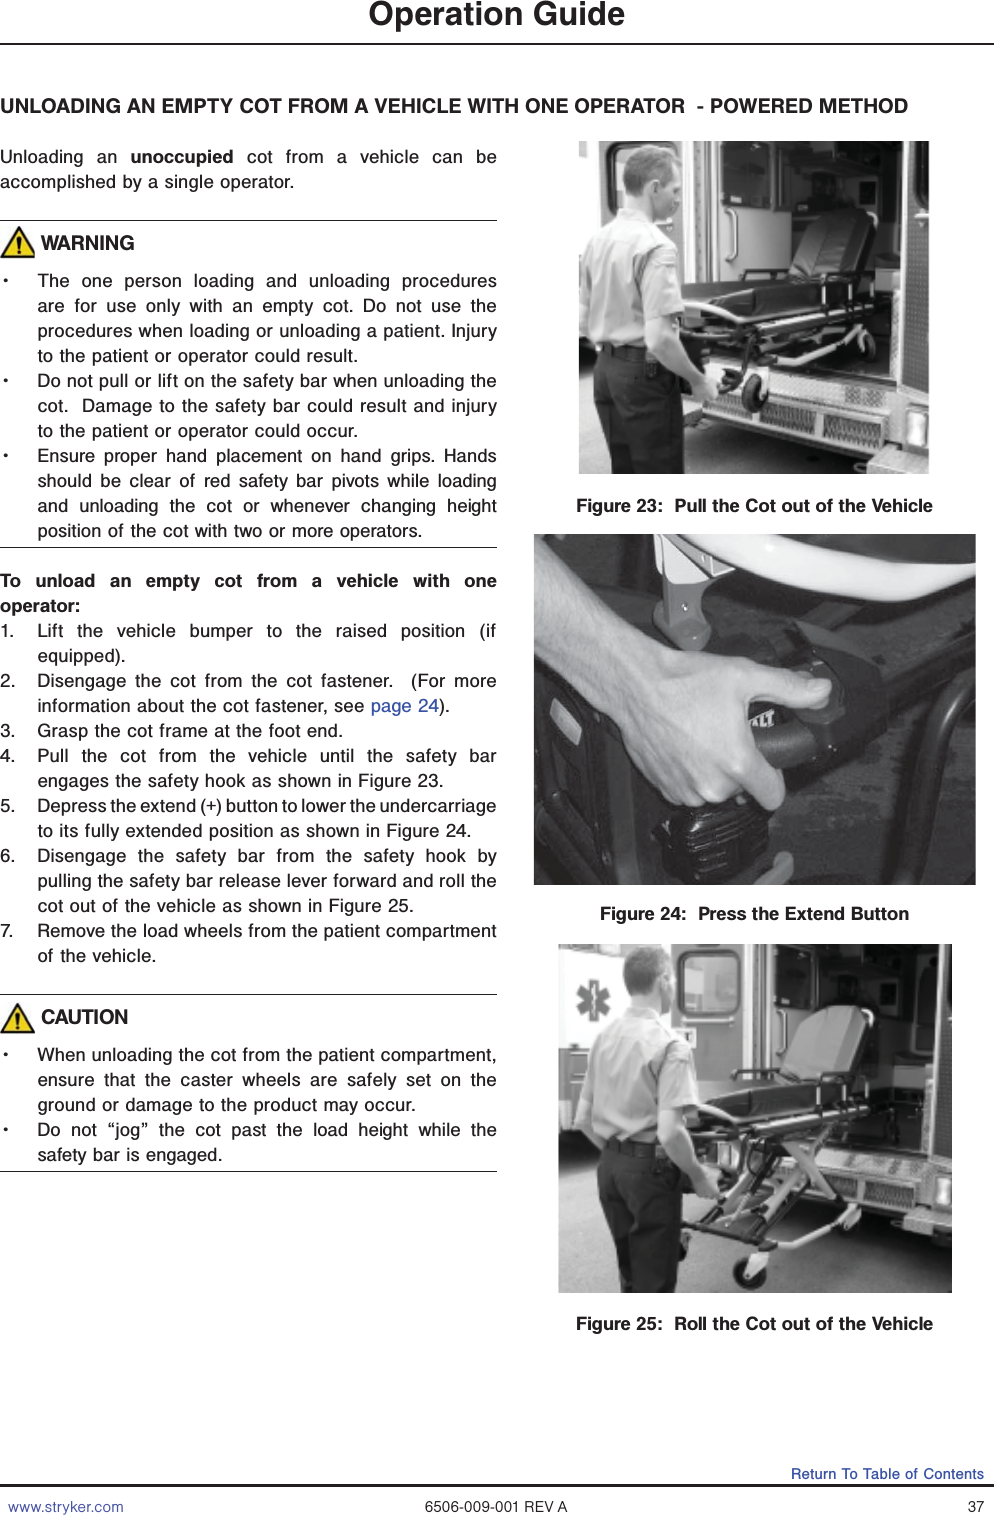 www.stryker.com 6506-009-001 REV A 37Return To Table of ContentsOperation GuideFigure 23:  Pull the Cot out of the VehicleFigure 24:  Press the Extend ButtonFigure 25:  Roll the Cot out of the VehicleUNLOADING AN EMPTY COT FROM A VEHICLE WITH ONE OPERATOR  - POWERED METHODUnloading an unoccupied cot from a vehicle can be accomplished by a single operator. WARNINGǨɣ The one person loading and unloading procedures are for use only with an empty cot. Do not use the procedures when loading or unloading a patient. Injury to the patient or operator could result. Ǩɣ Do not pull or lift on the safety bar when unloading the cot.  Damage to the safety bar could result and injury to the patient or operator could occur. Ǩɣ Ensure proper hand placement on hand grips. Hands should be clear of red safety bar pivots while loading and unloading the cot or whenever changing height position of the cot with two or more operators.To unload an empty cot from a vehicle with one operator: 1.  Lift the vehicle bumper to the raised position (if equipped). 2.  Disengage the cot from the cot fastener.  (For more information about the cot fastener, see page 24). 3.  Grasp the cot frame at the foot end.  4.  Pull the cot from the vehicle until the safety bar engages the safety hook as shown in Figure 23.5.  Depress the extend (+) button to lower the undercarriage to its fully extended position as shown in Figure 24.6.  Disengage the safety bar from the safety hook by pulling the safety bar release lever forward and roll the cot out of the vehicle as shown in Figure 25. 7.  Remove the load wheels from the patient compartment of the vehicle. CAUTIONǨɣ When unloading the cot from the patient compartment, ensure that the caster wheels are safely set on the ground or damage to the product may occur. Ǩɣ Do not “jog” the cot past the load height while the safety bar is engaged.